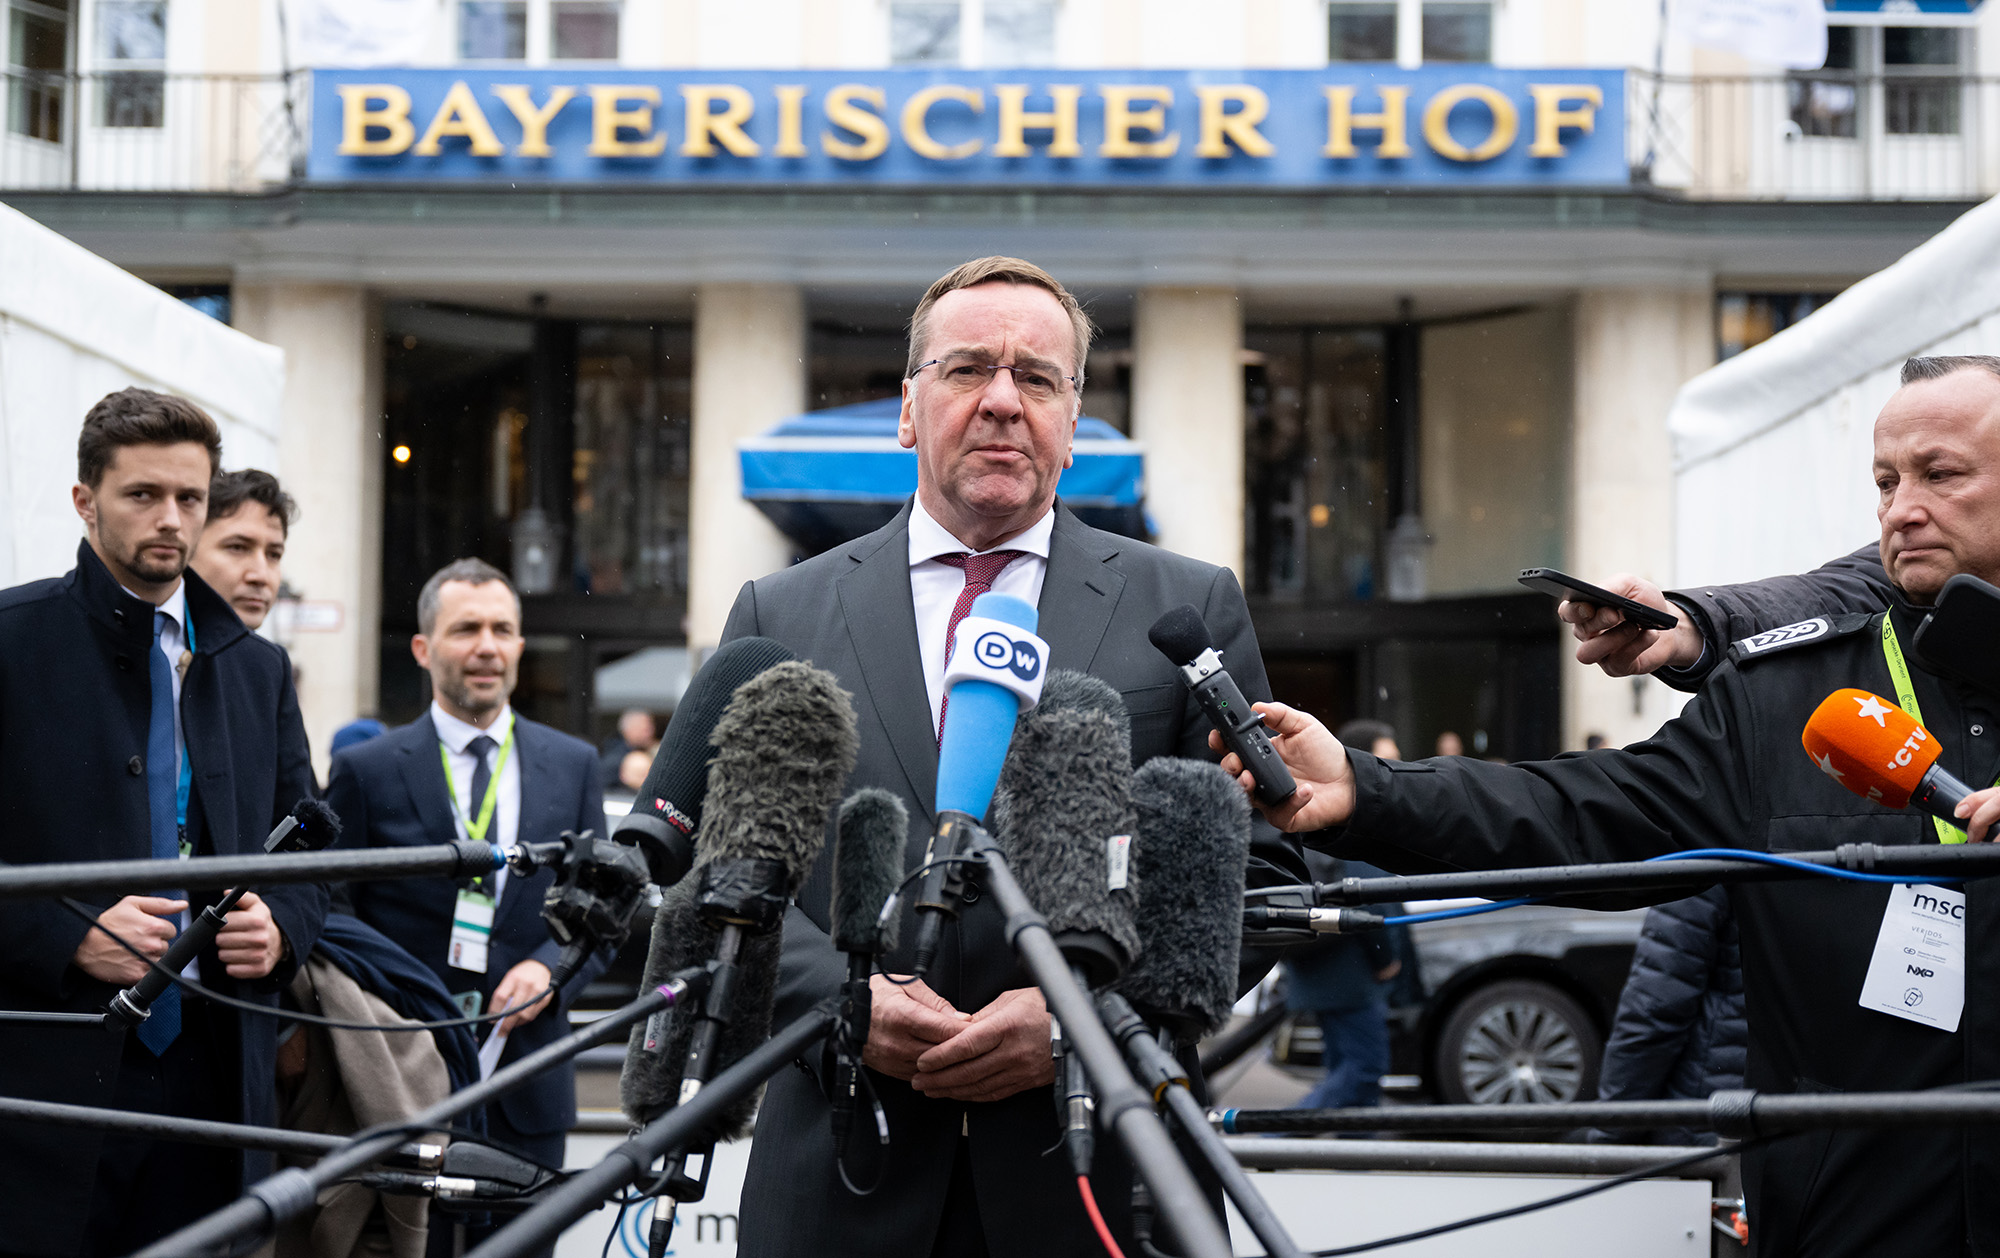 Boris Pistorius, German Minister of Defense, makes a statement in front of the Hotel Bayerischer Hof before the start of the 59th Munich Security Conference (MSC) in Munich, Germany, on February 17.